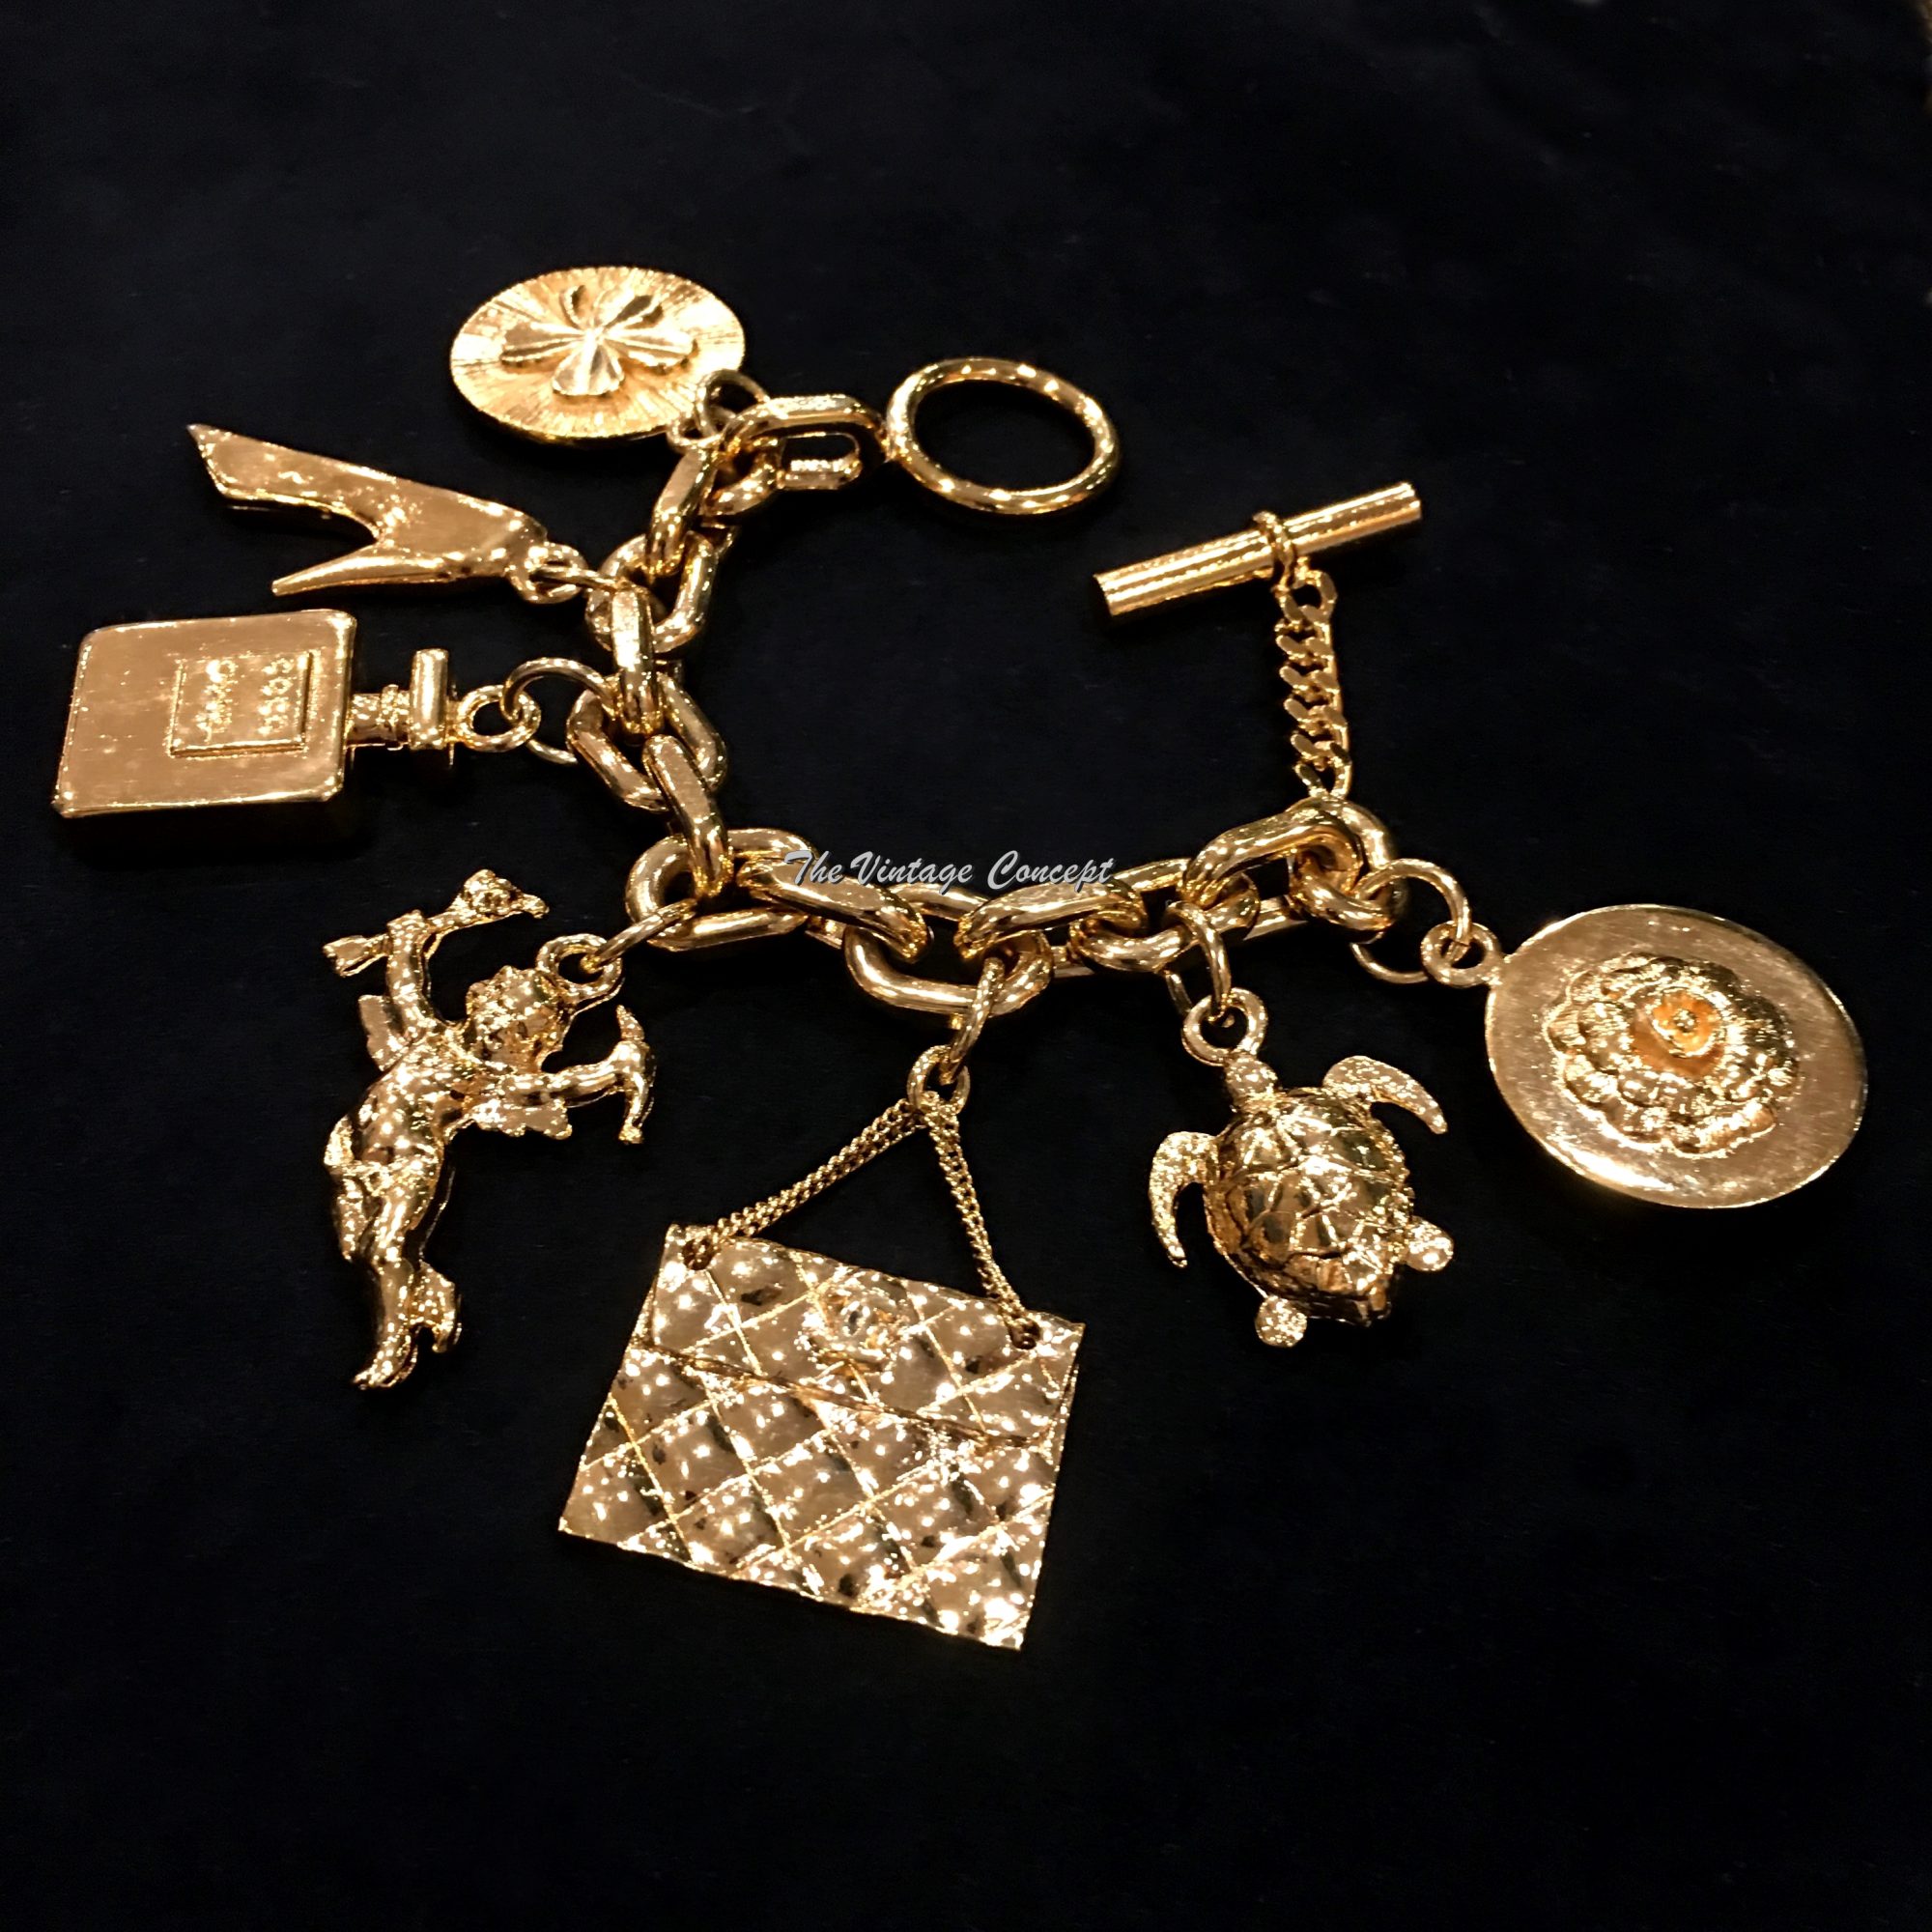 Vintage Chanel Gold Tone Heavy Charm Bracelet from 70-80's - The Vintage Concept